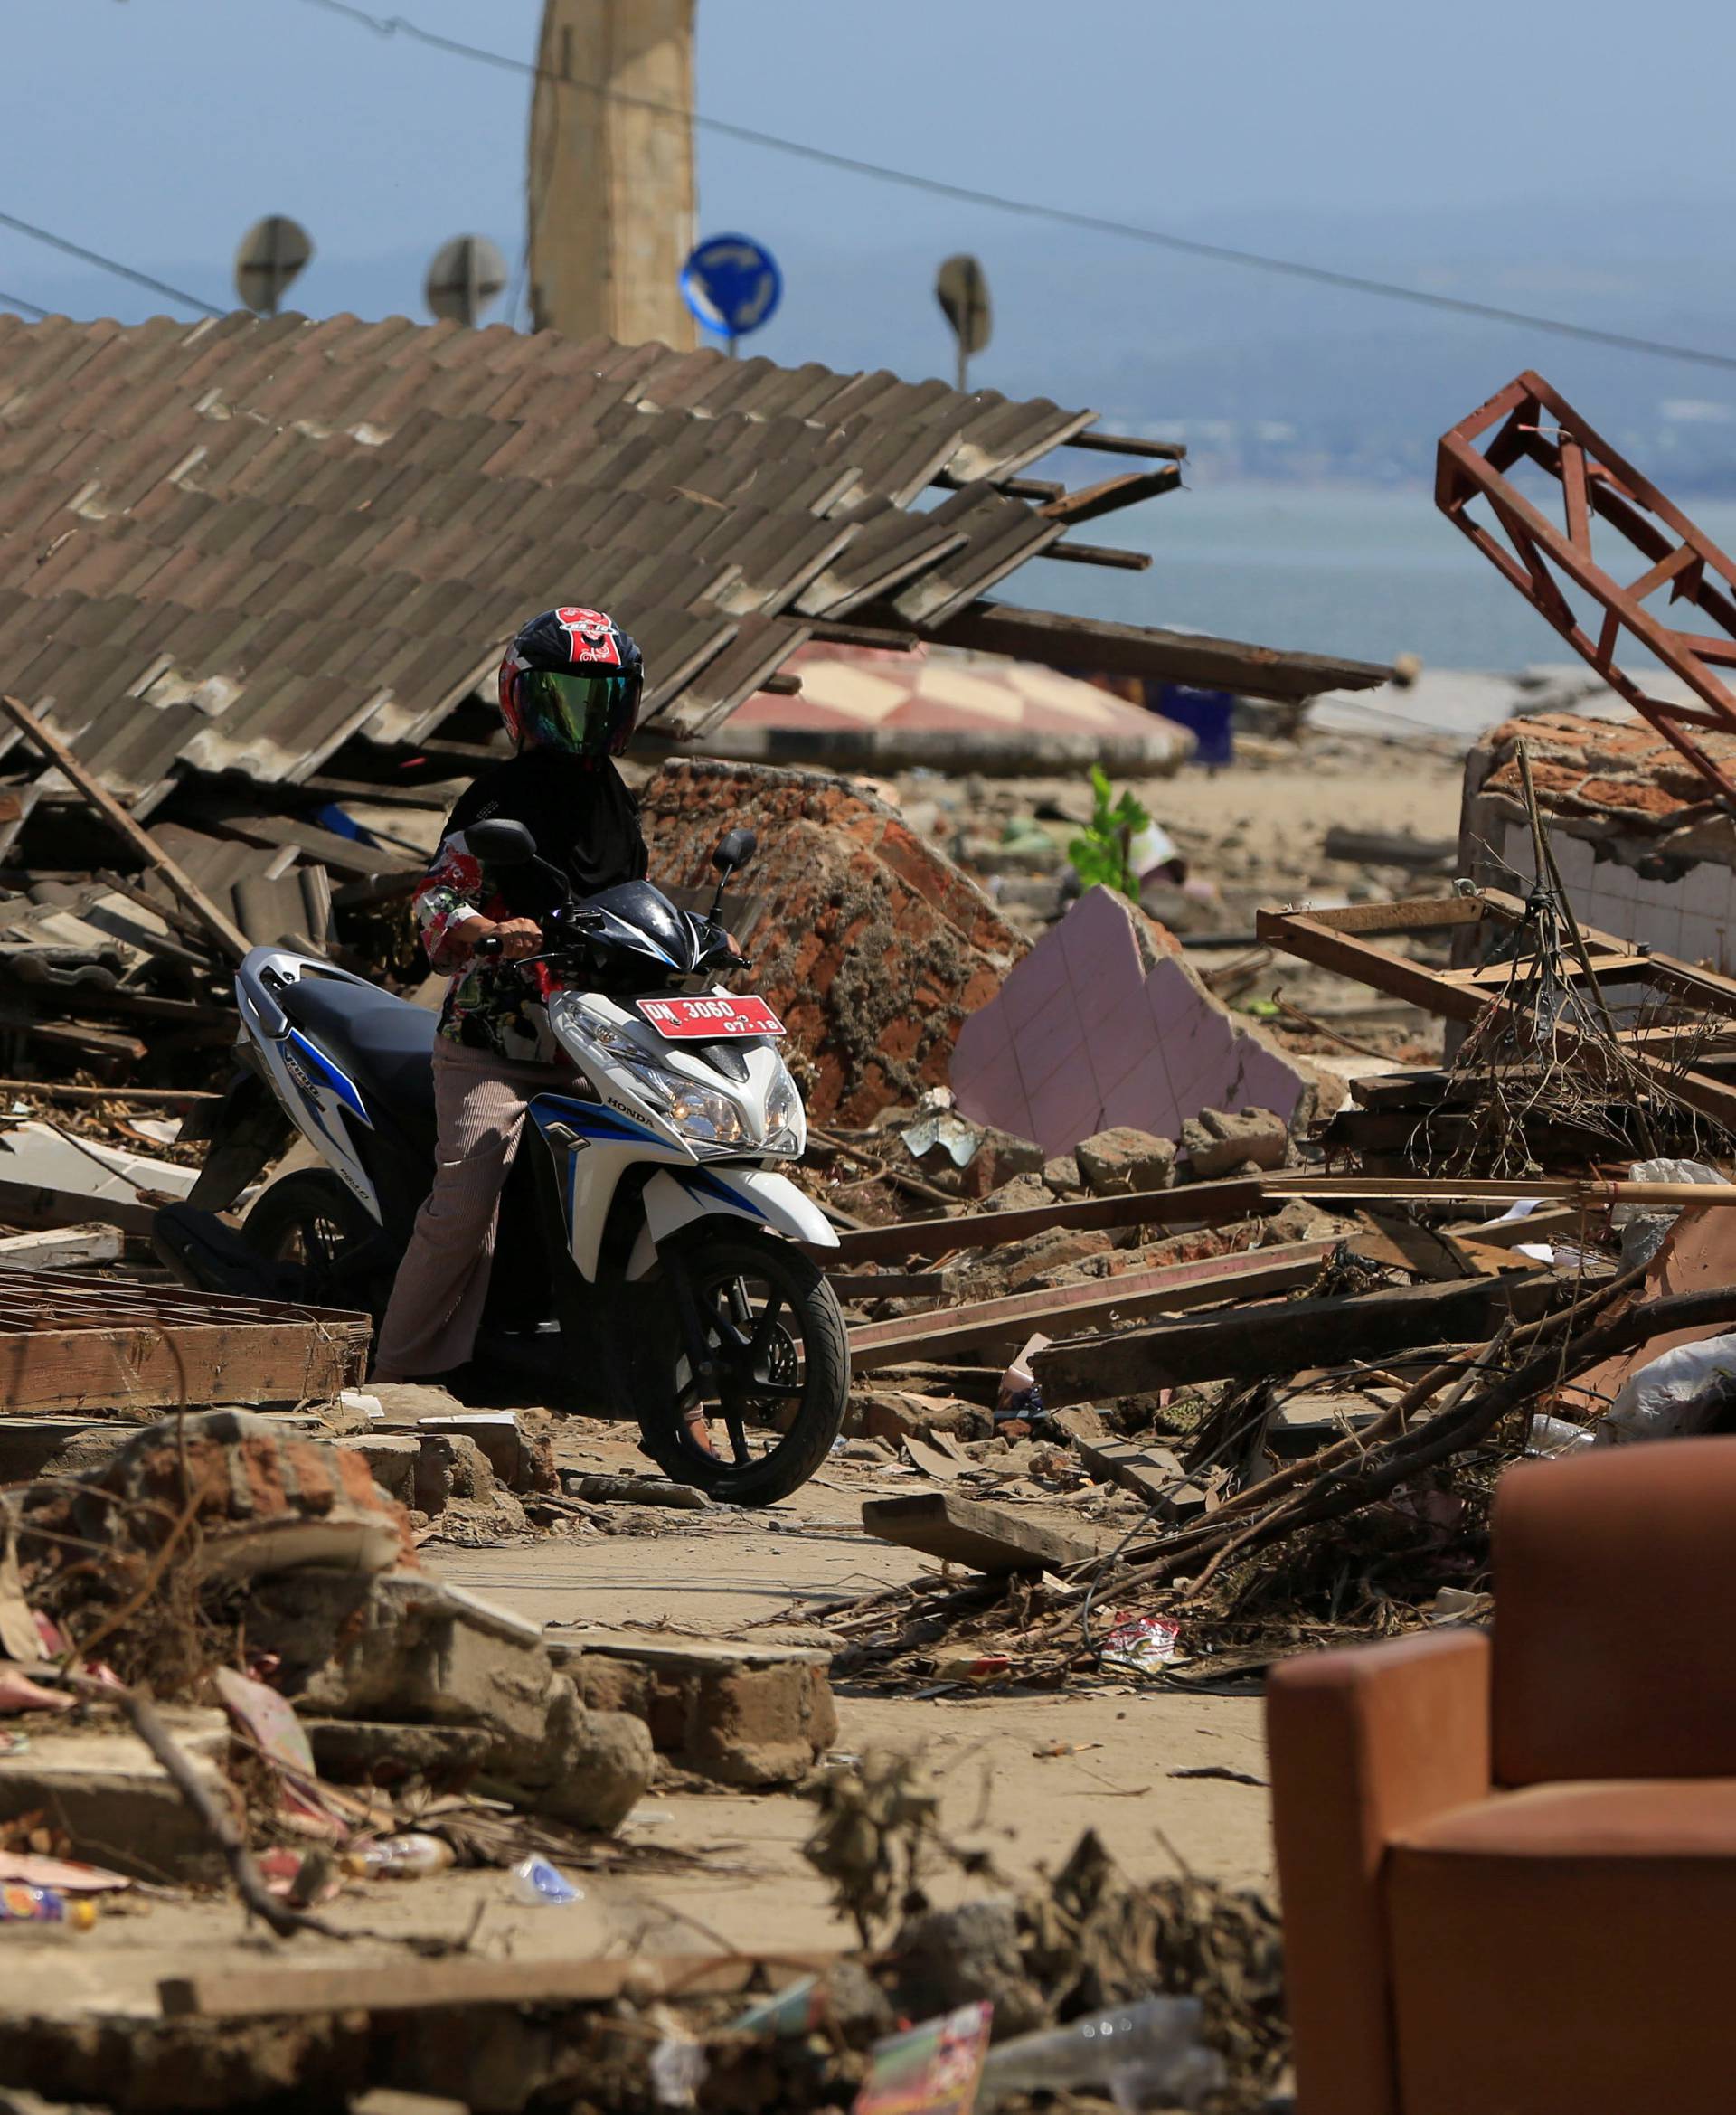 A resident rides her motorcycle among debris after the tsunami in Palu